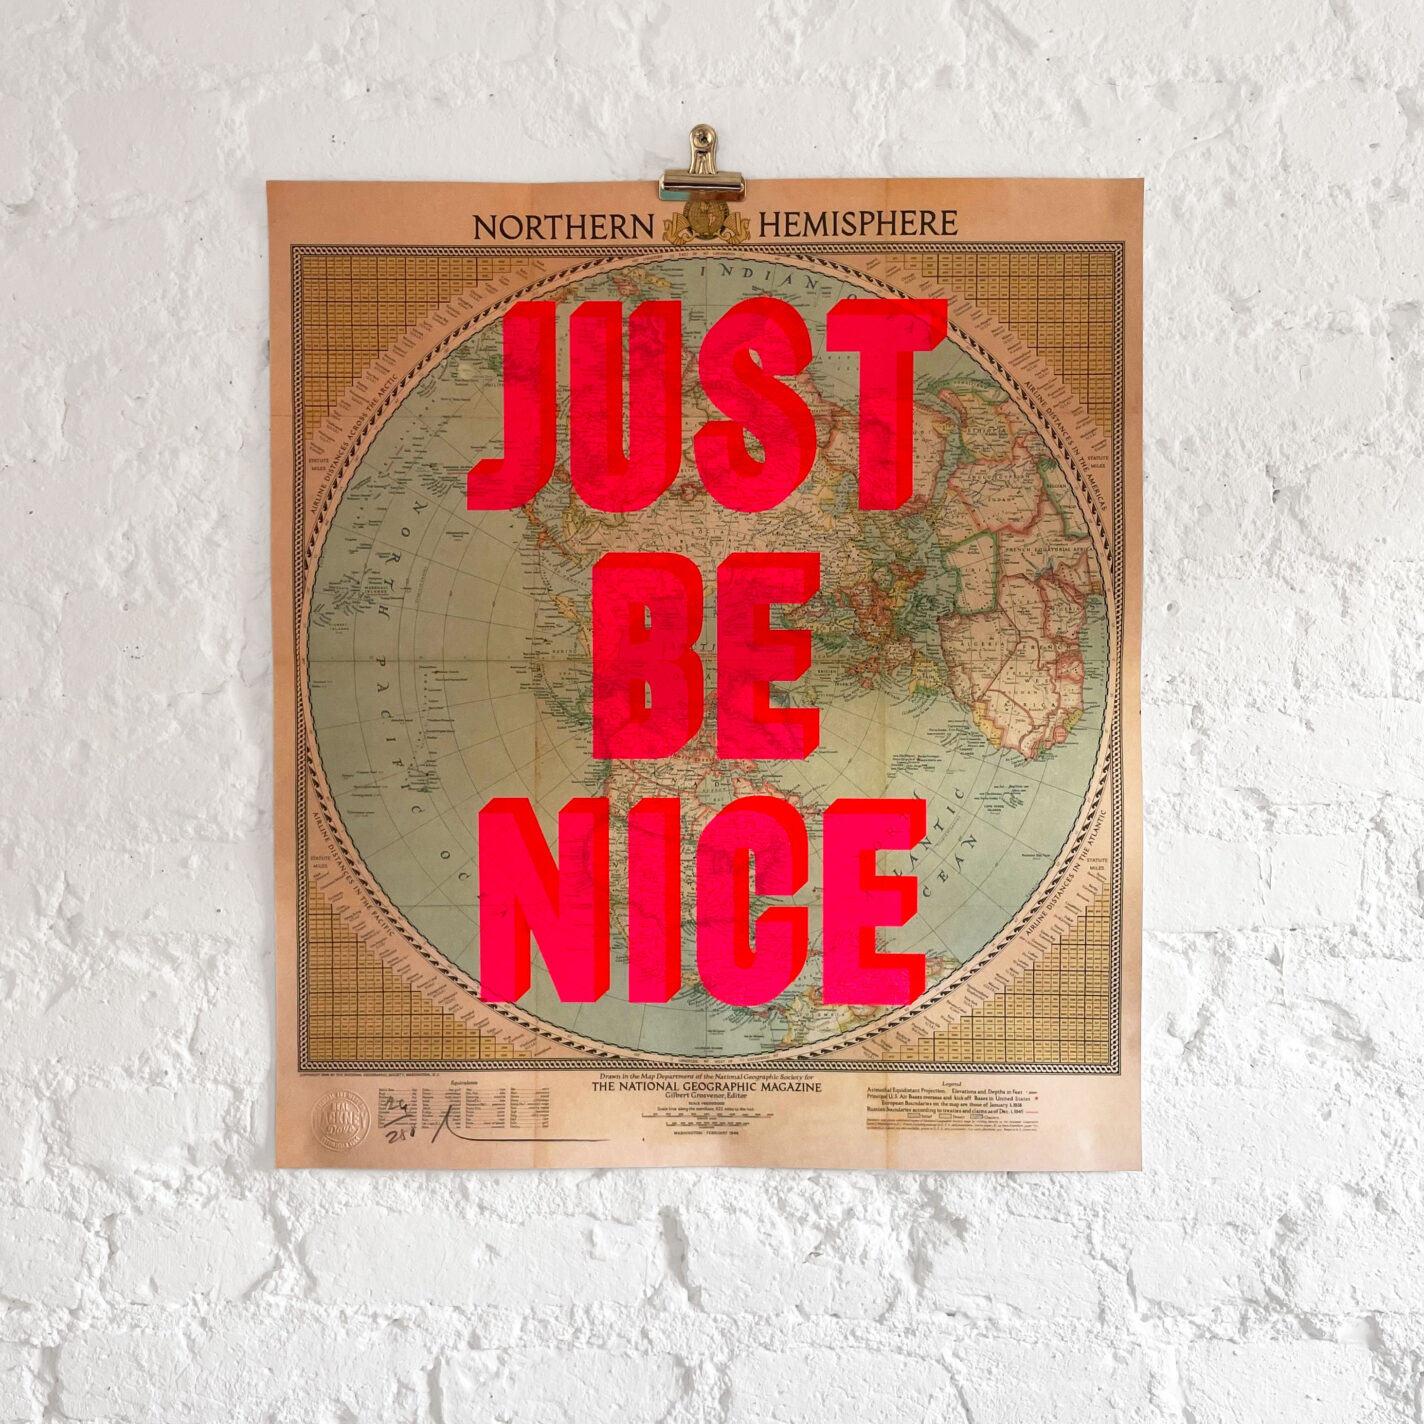 Just Be Nice.